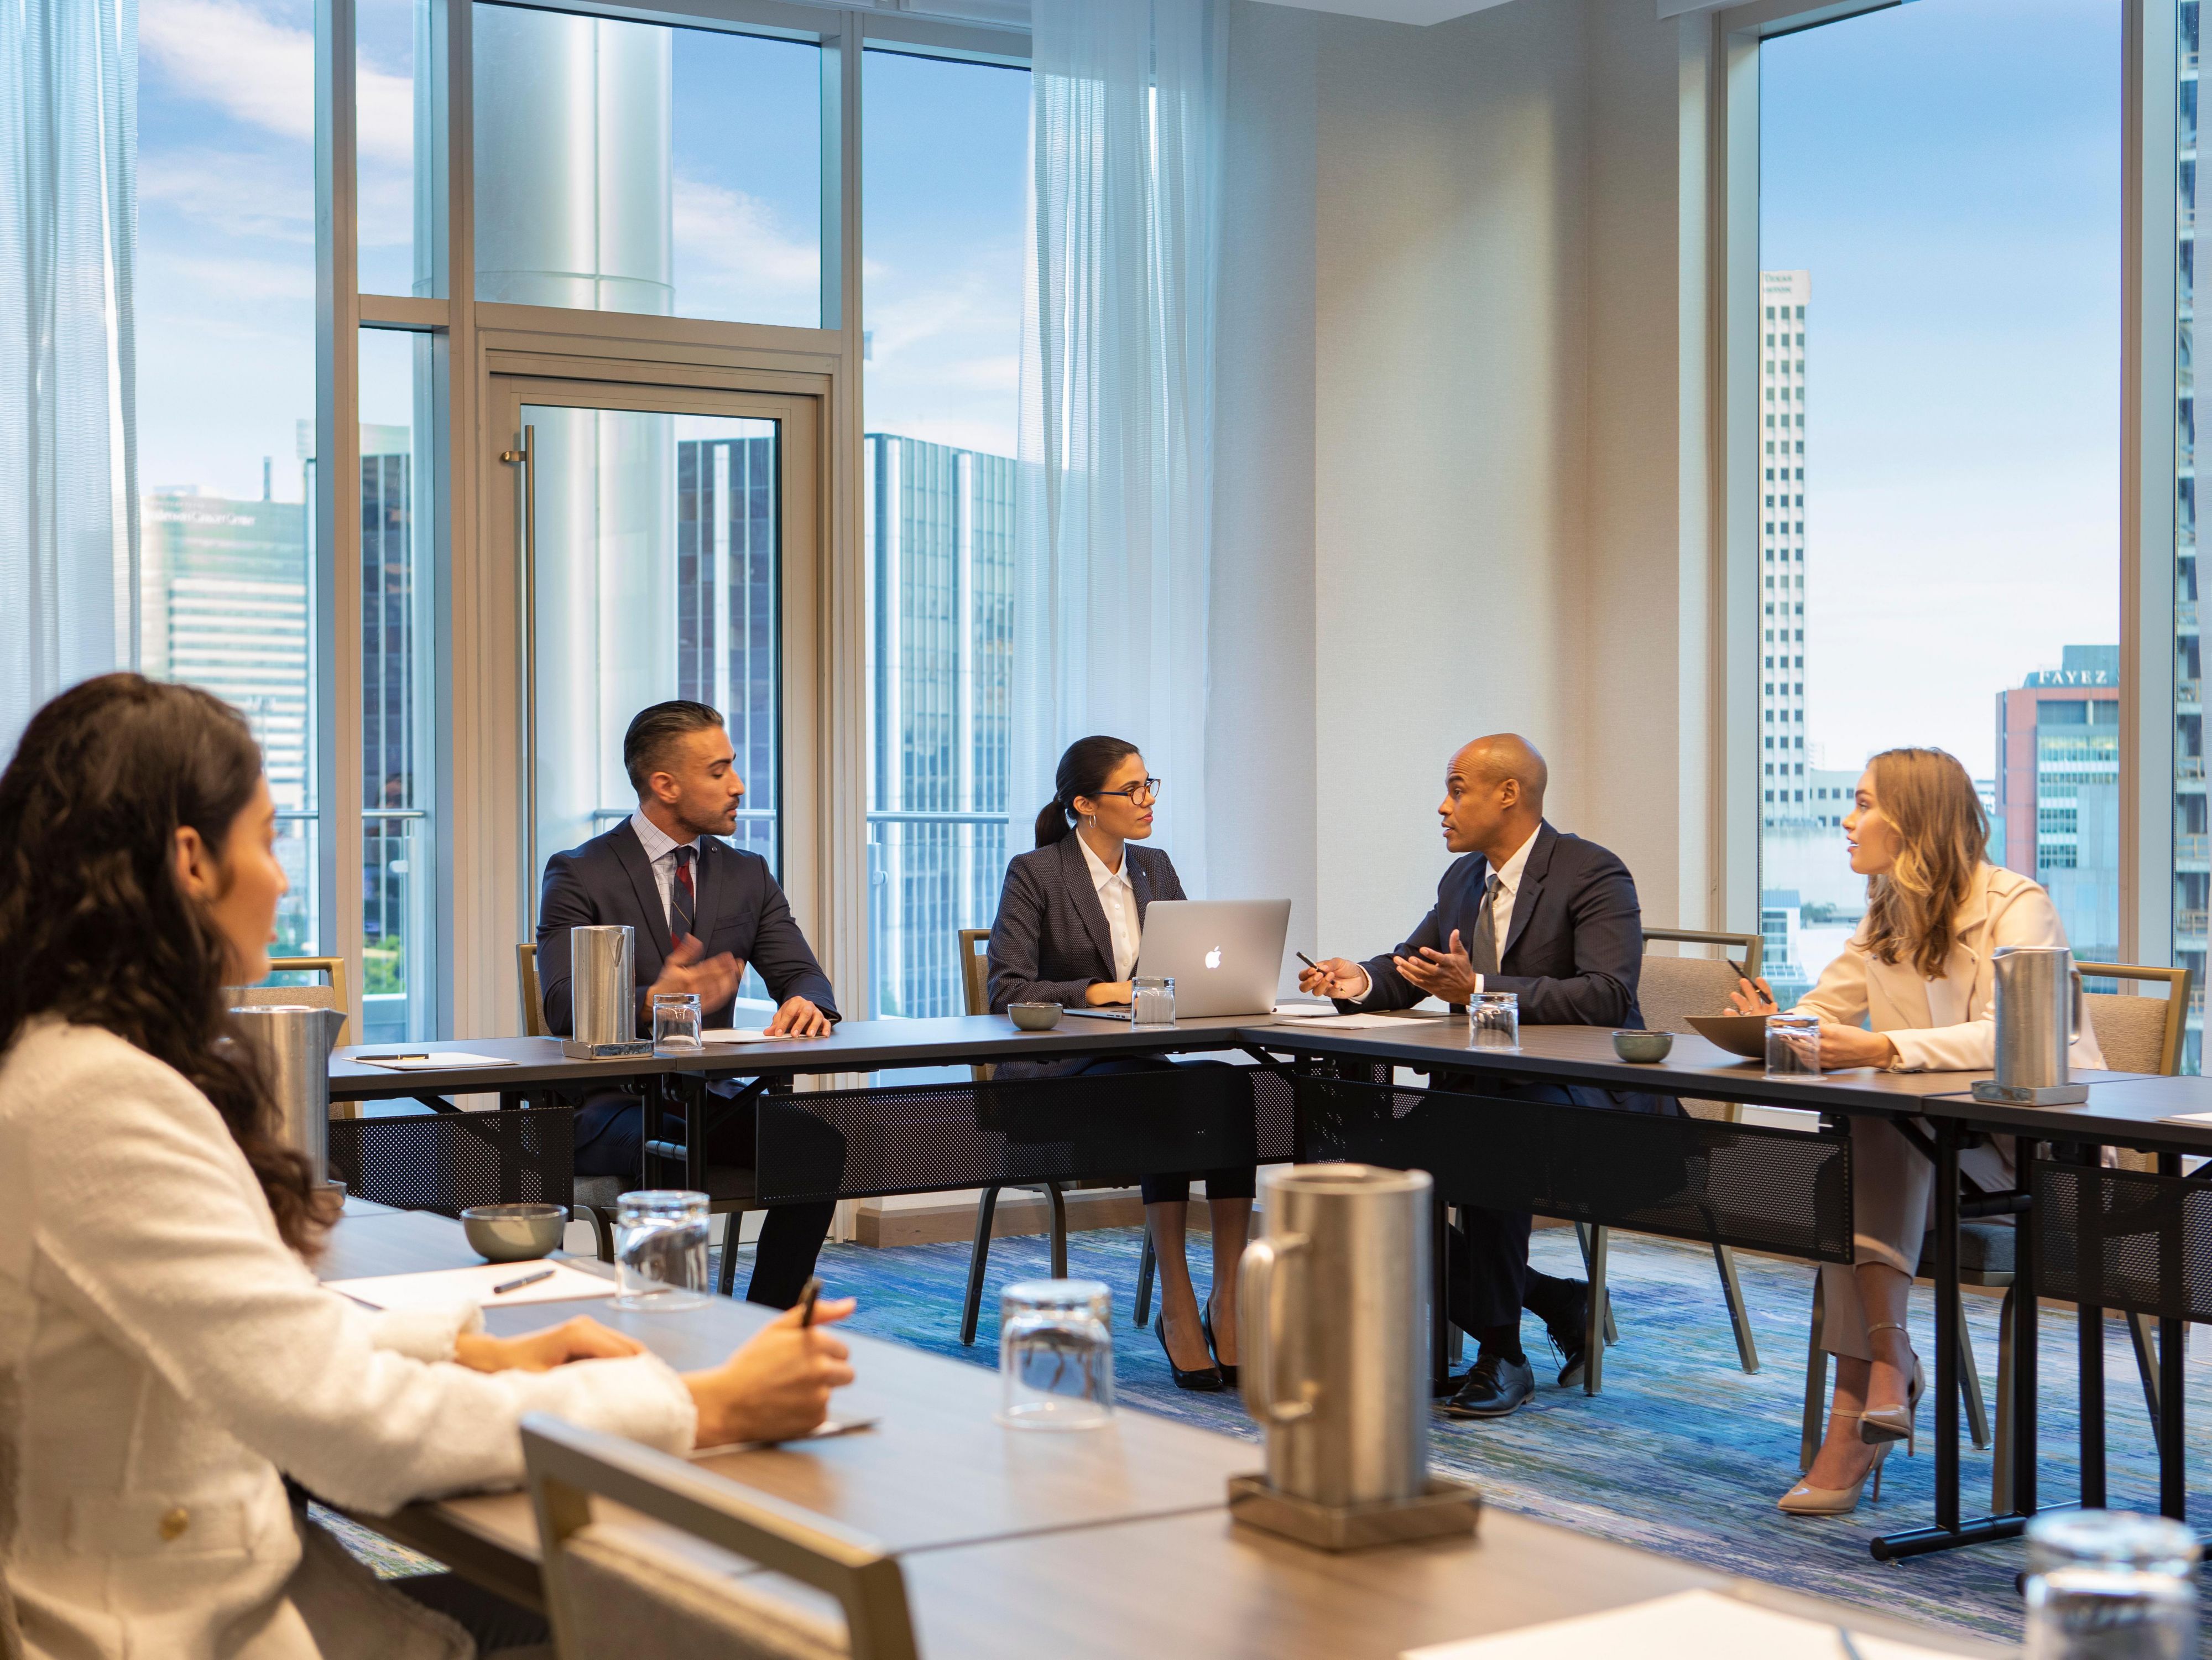 Our flexible boardroom is ideal for meetings in Houston.